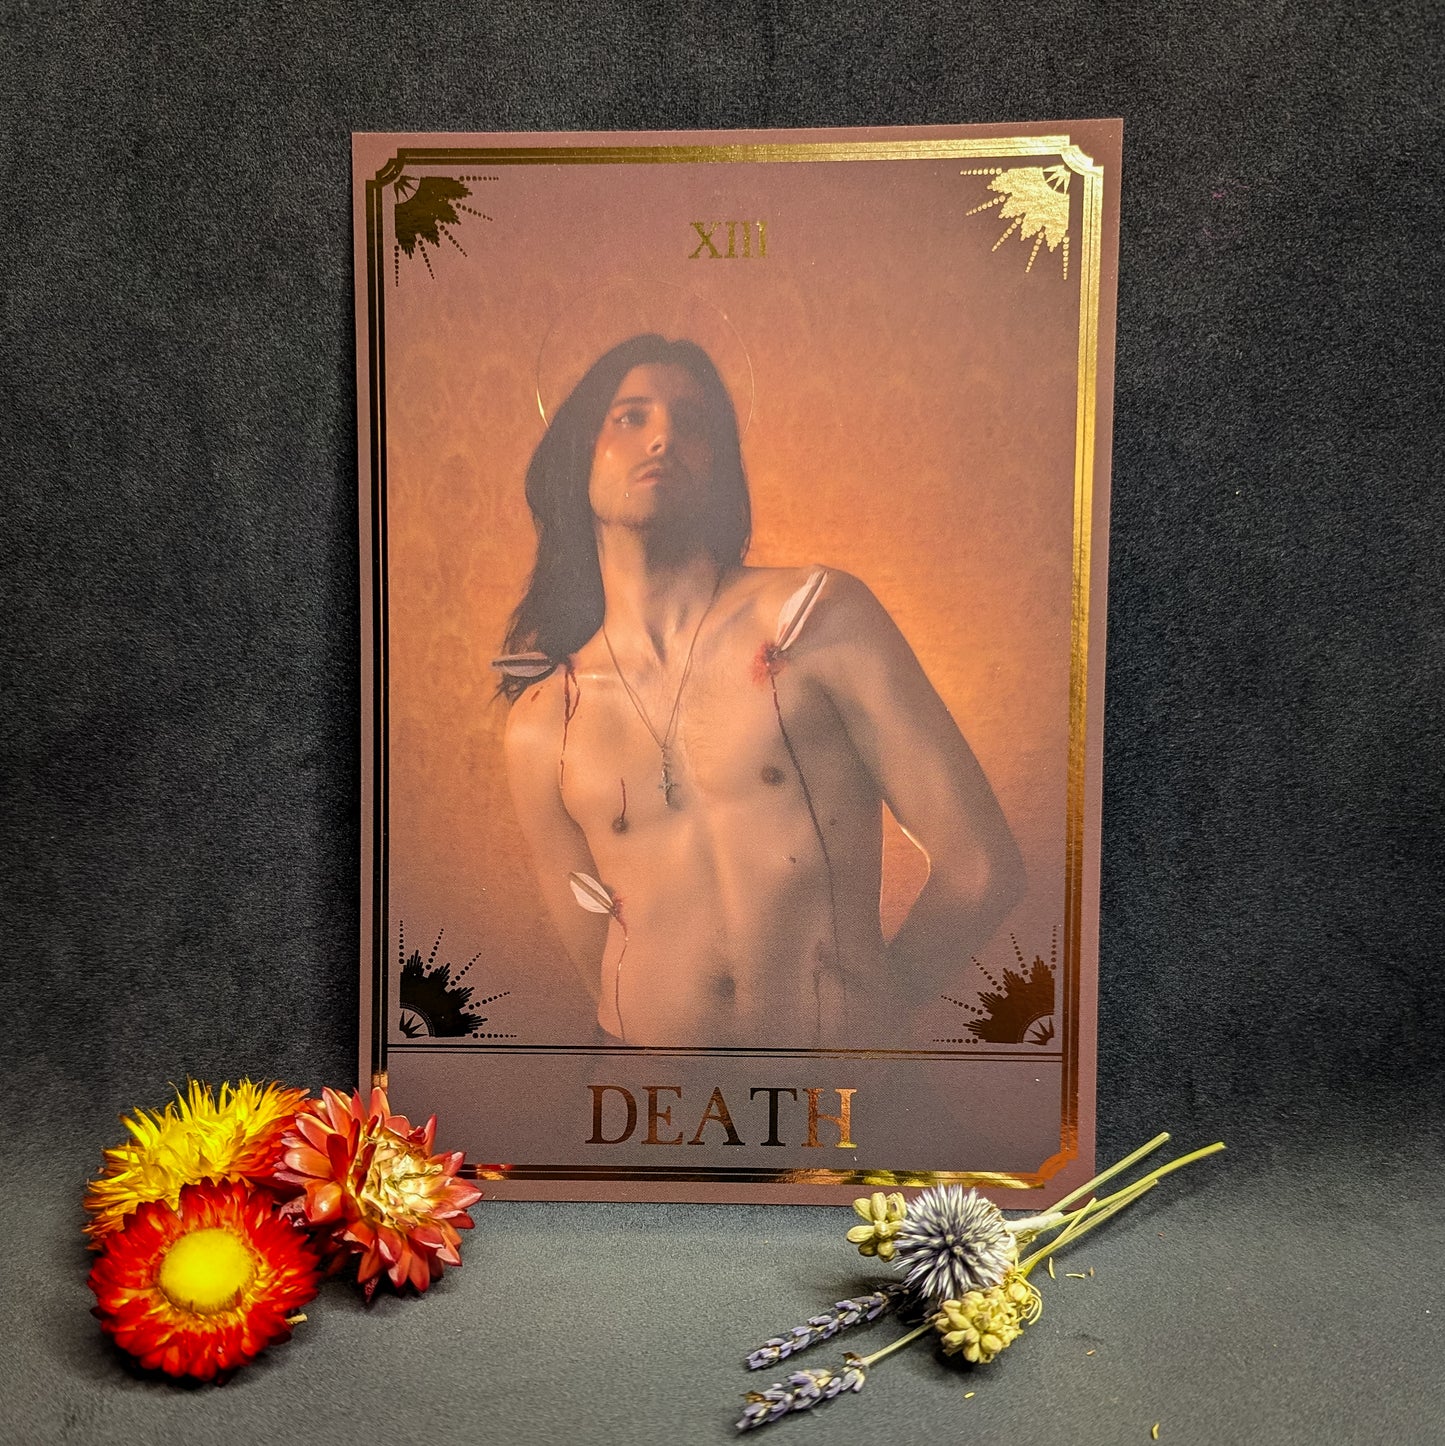 "Death" Photo Print by Xanthe Kittson